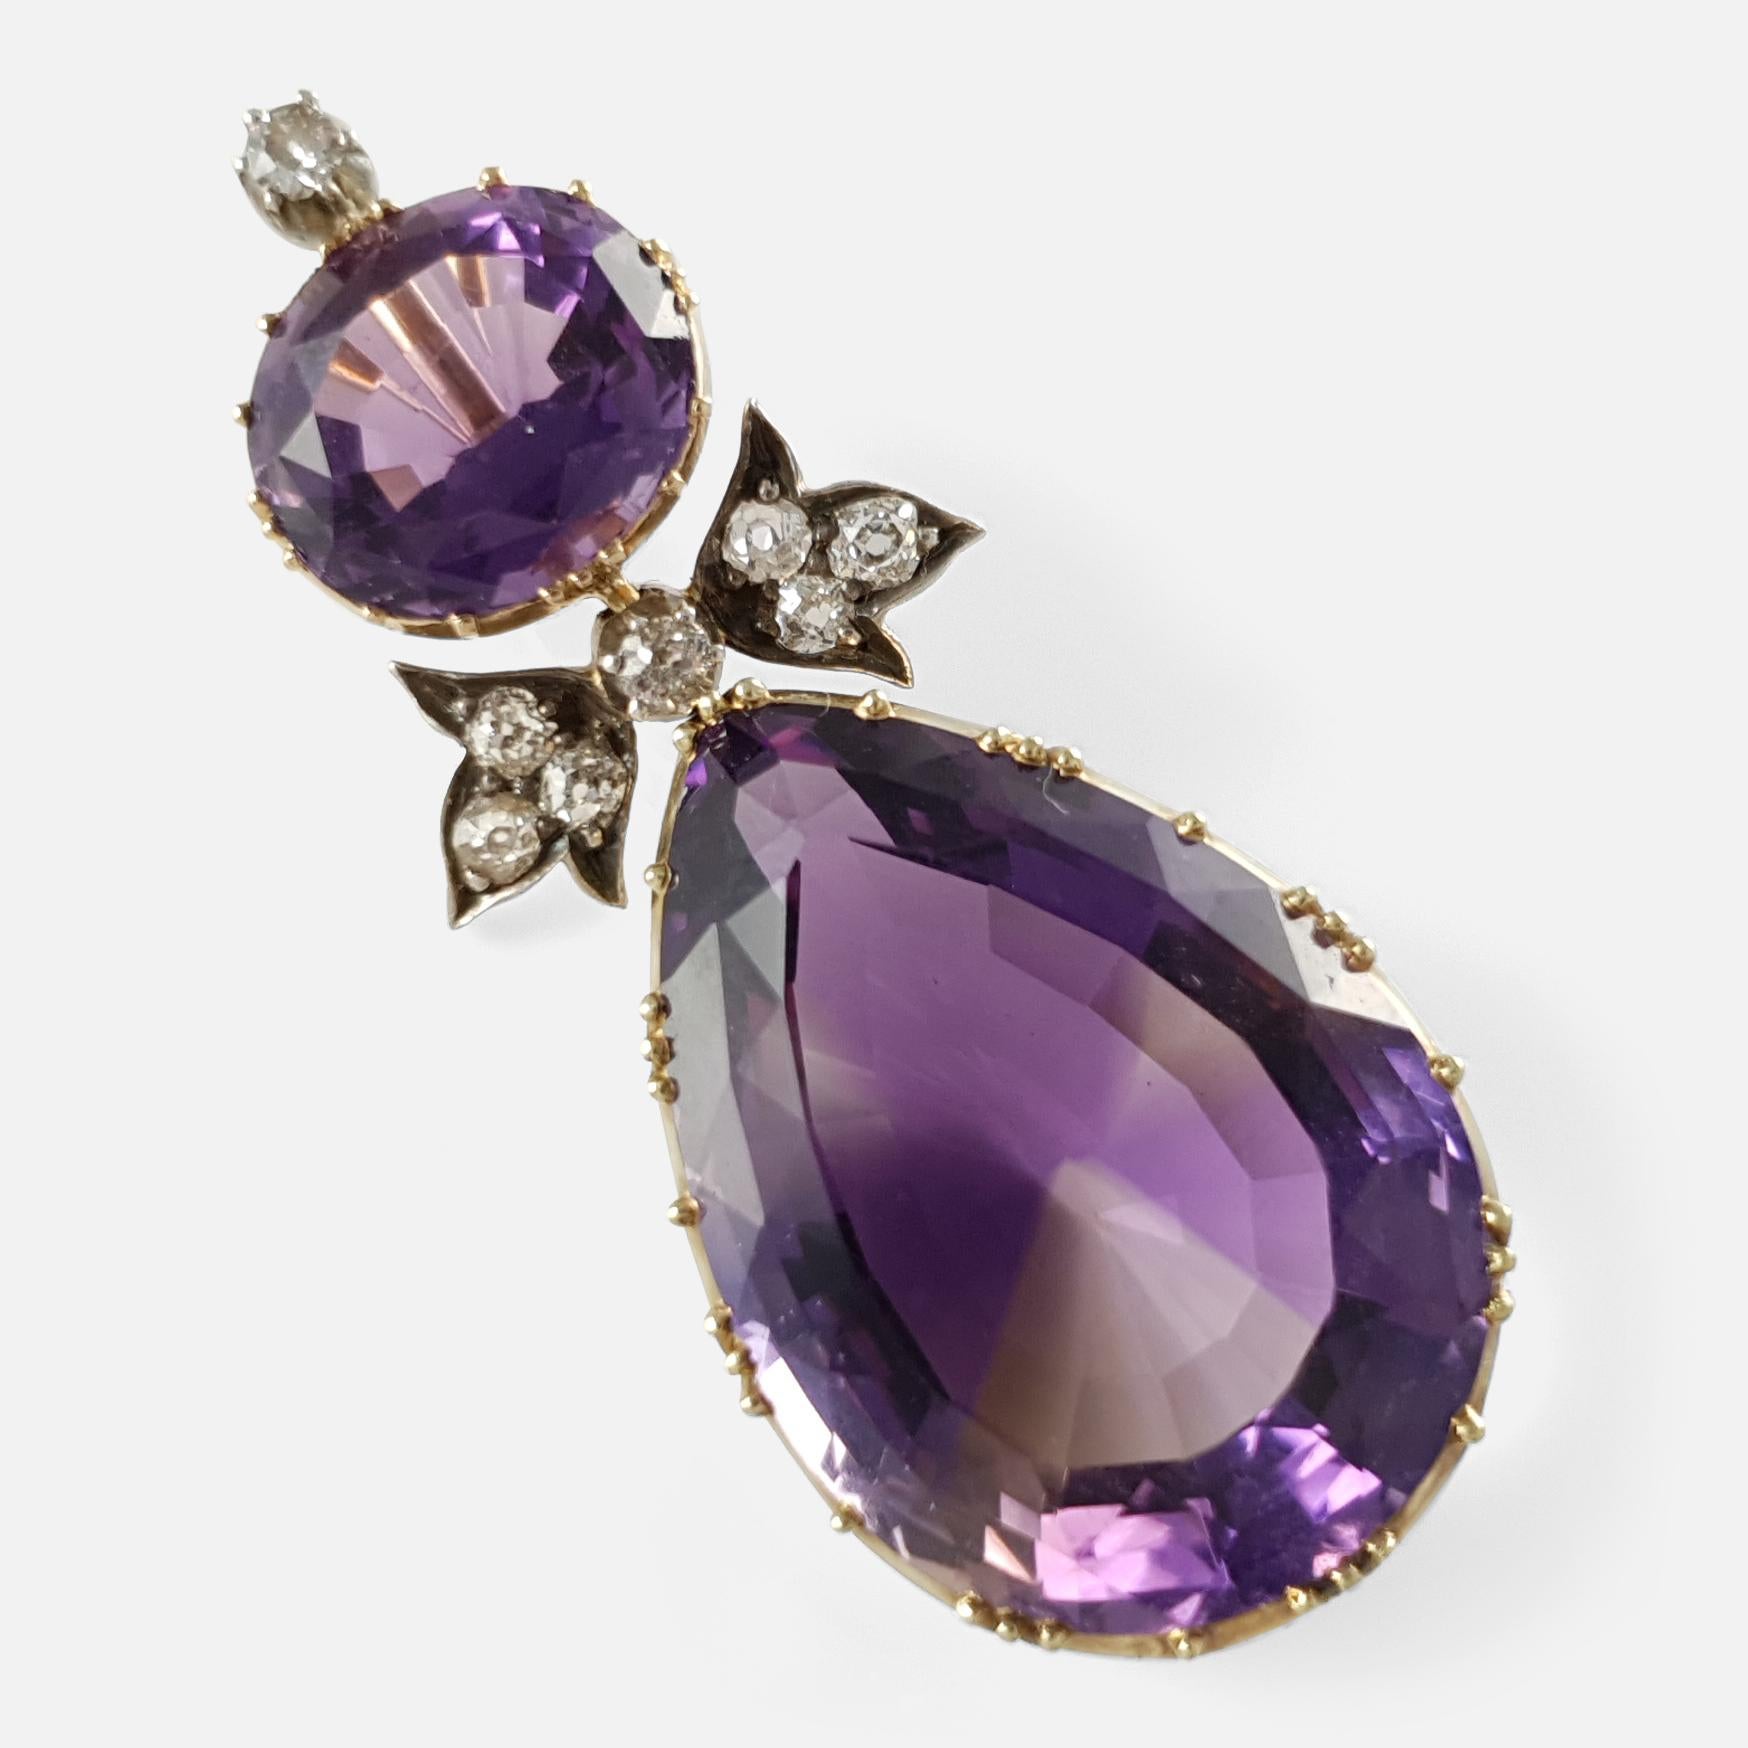 Description: - This is a stunning antique 15 karat yellow gold amethyst and diamond drop pendant. The pendant is fronted by an old round cut diamond above a horizontally set oval cut amethyst, that suspends a pair of ivy leaves set with a further